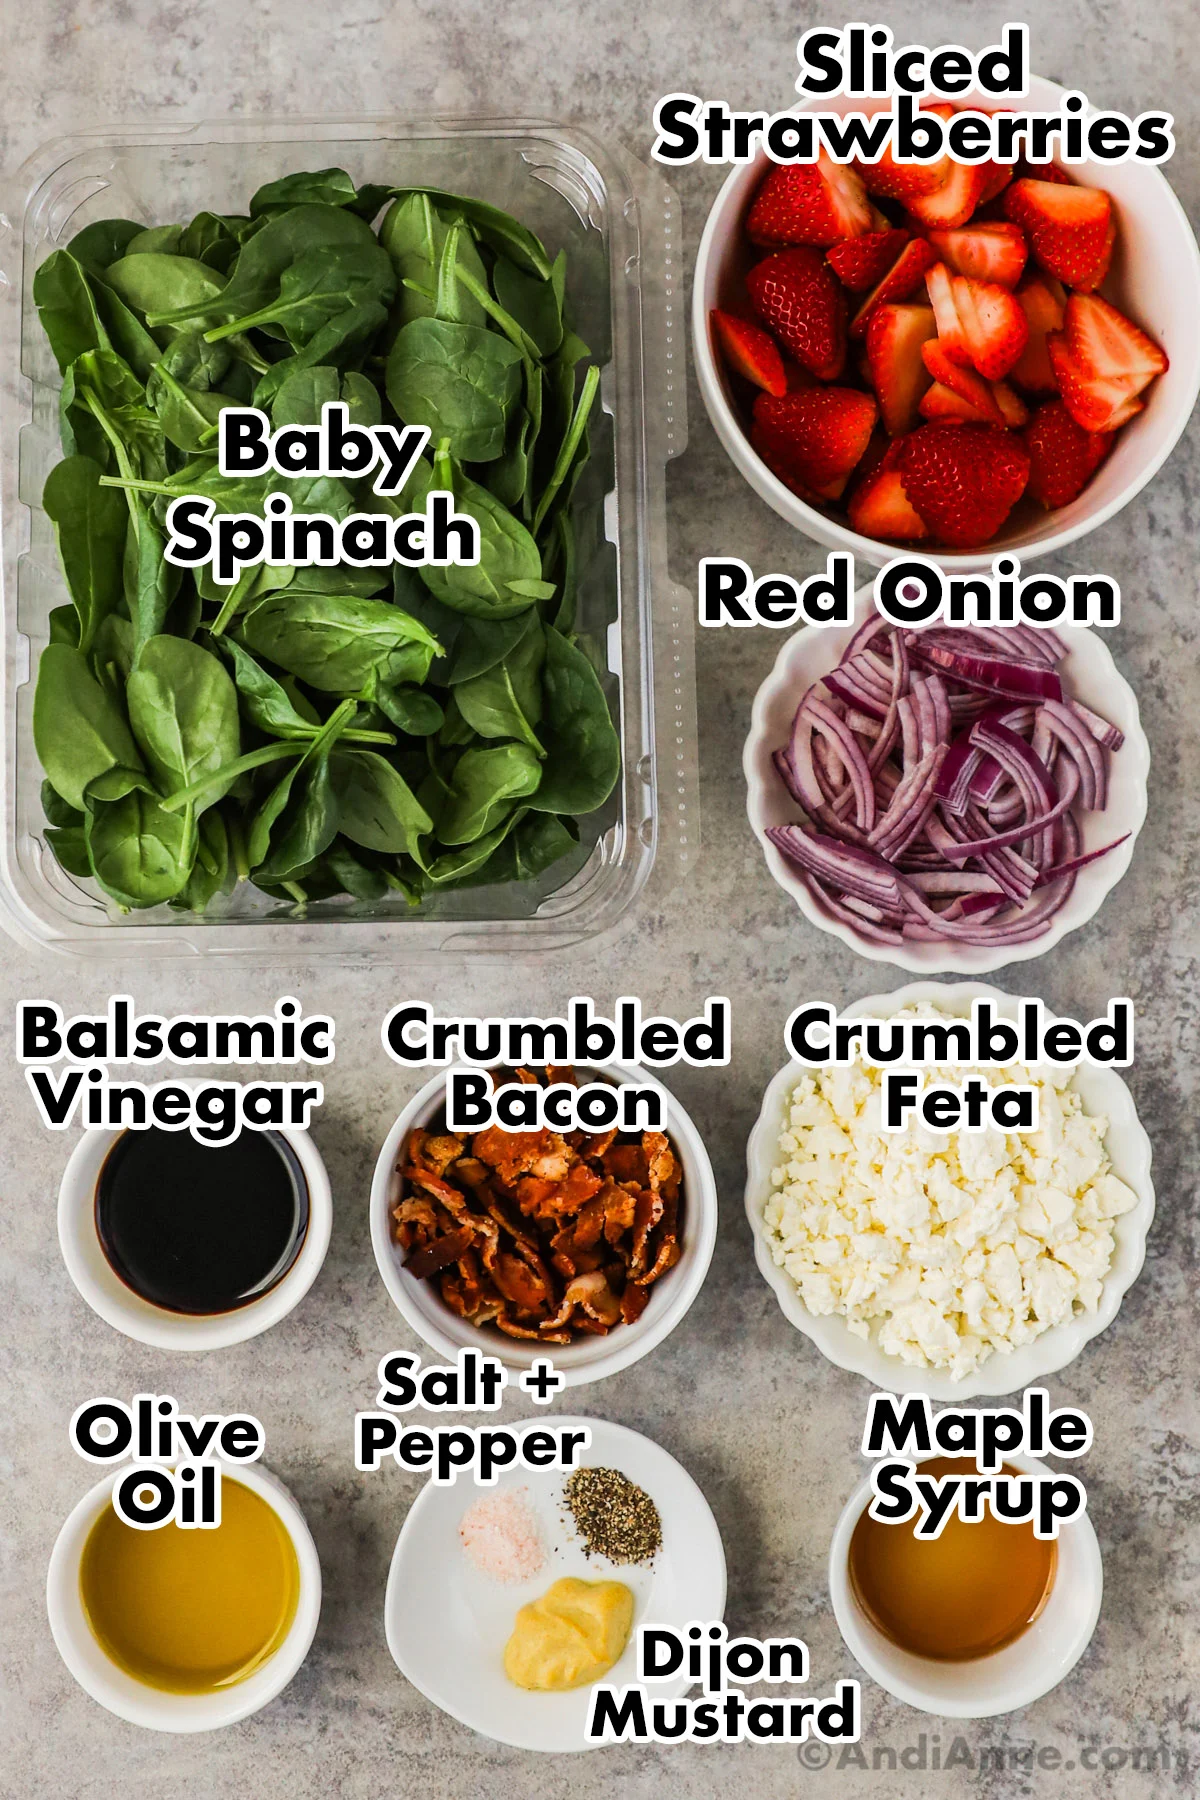 Recipe ingredients including a container of baby spinach, sliced strawberries, sliced red onion, balsamic vinegar, crumbled bacon, crumbled feta, olive oil, and maple syrup.